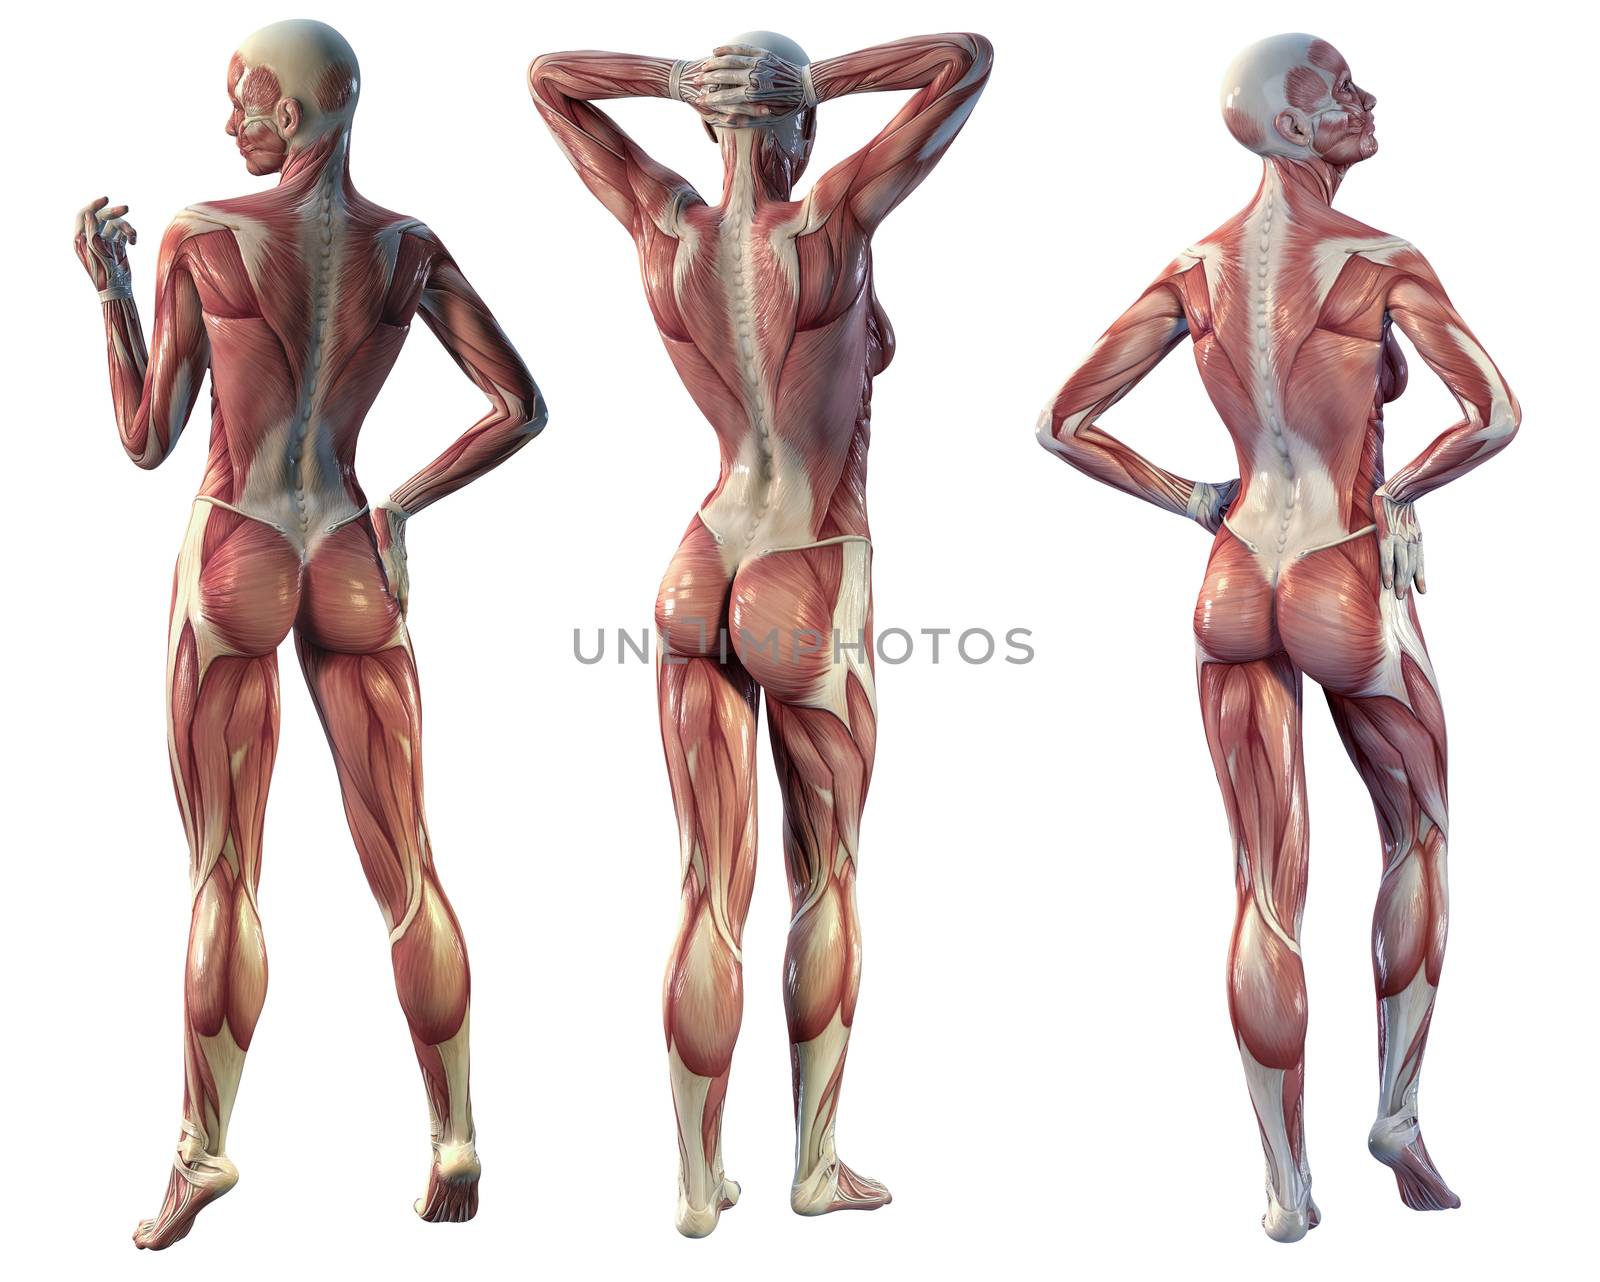 Digital illustration of muscle woman back view.